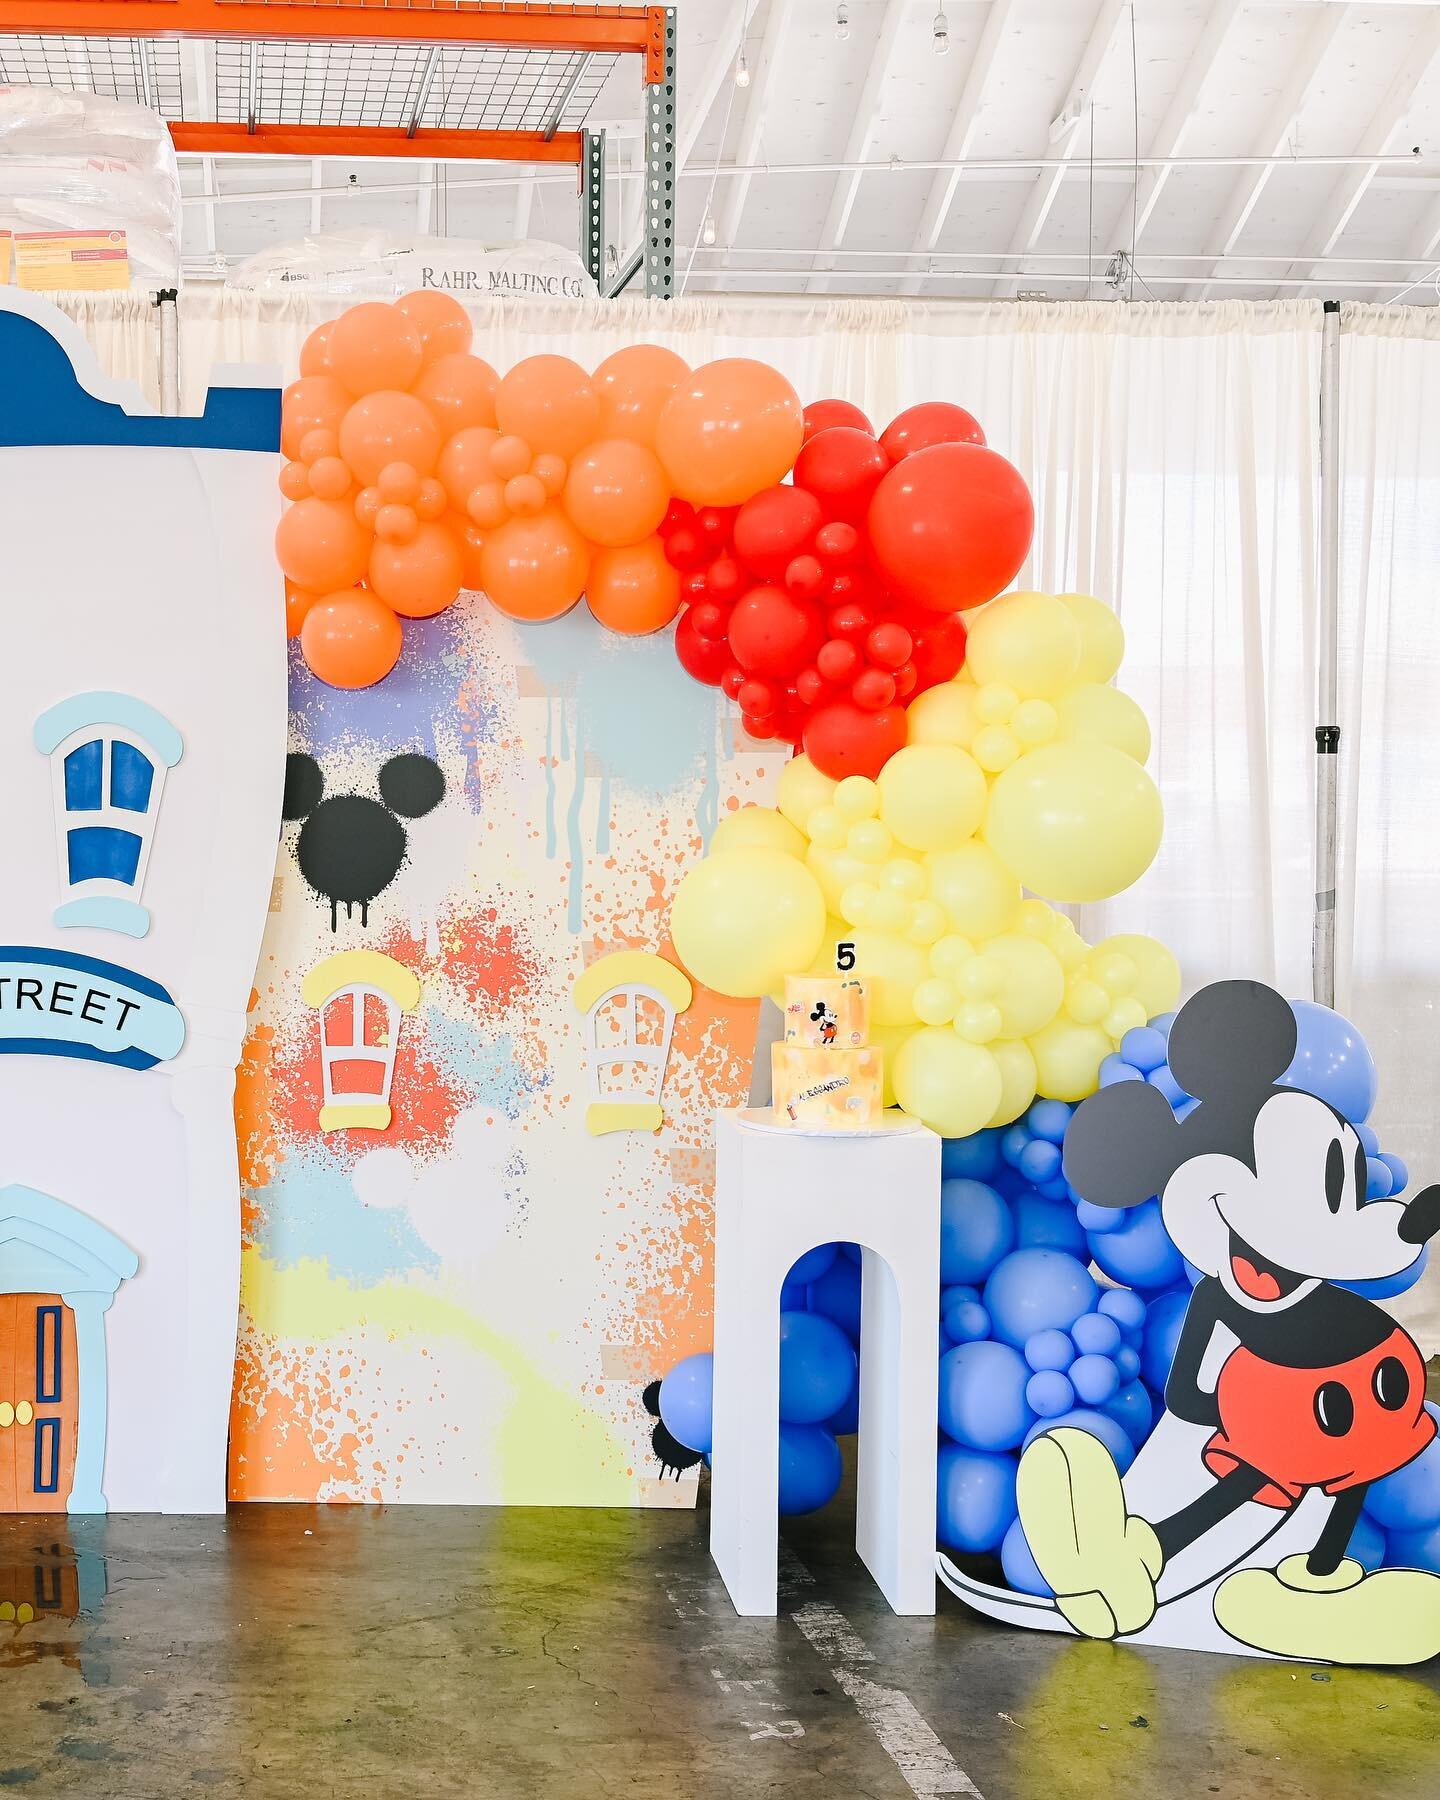 Toontown but make it street art.

The ideas and talent behind the @stay.goldendesign is truly art! Loved this street art spin on Mickey with this dream team:

Design + Planning: @stay.goldendesign
Photographer: @navasclickstop
Videographer: @2mb_imag